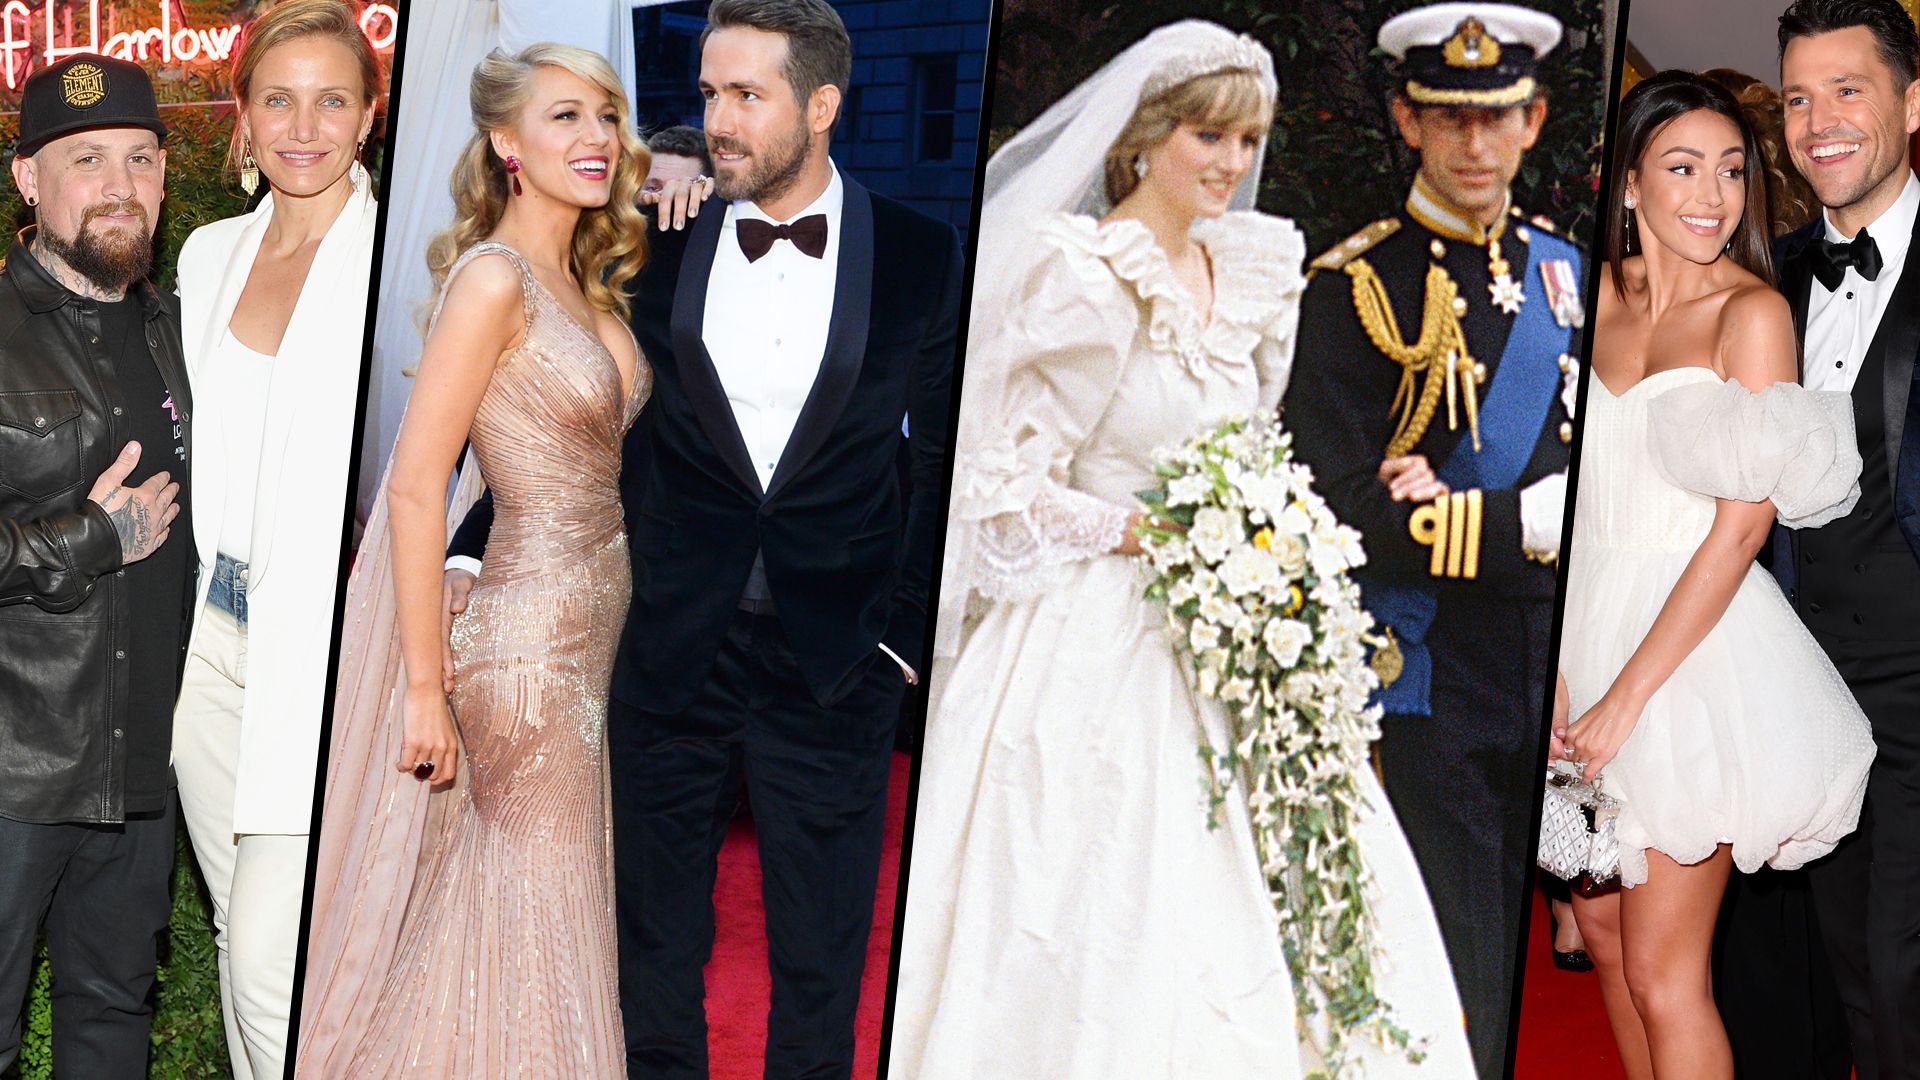 Celebrity couples including Blake Lively and Ryan Reynolds and Cameron Diaz and Benji Madden